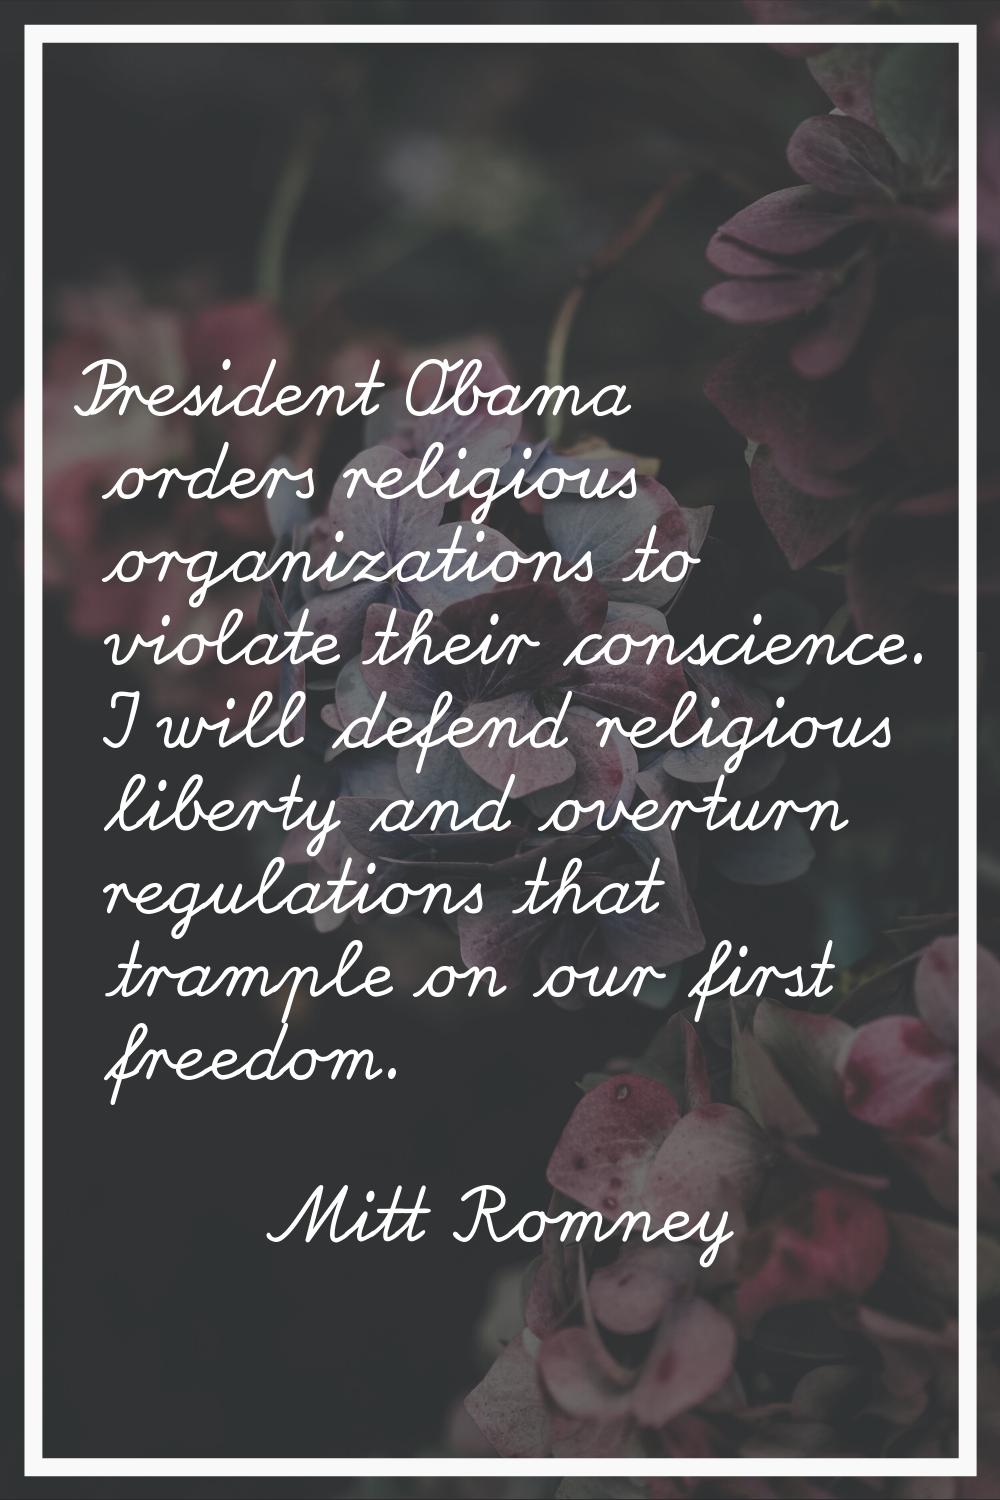 President Obama orders religious organizations to violate their conscience. I will defend religious